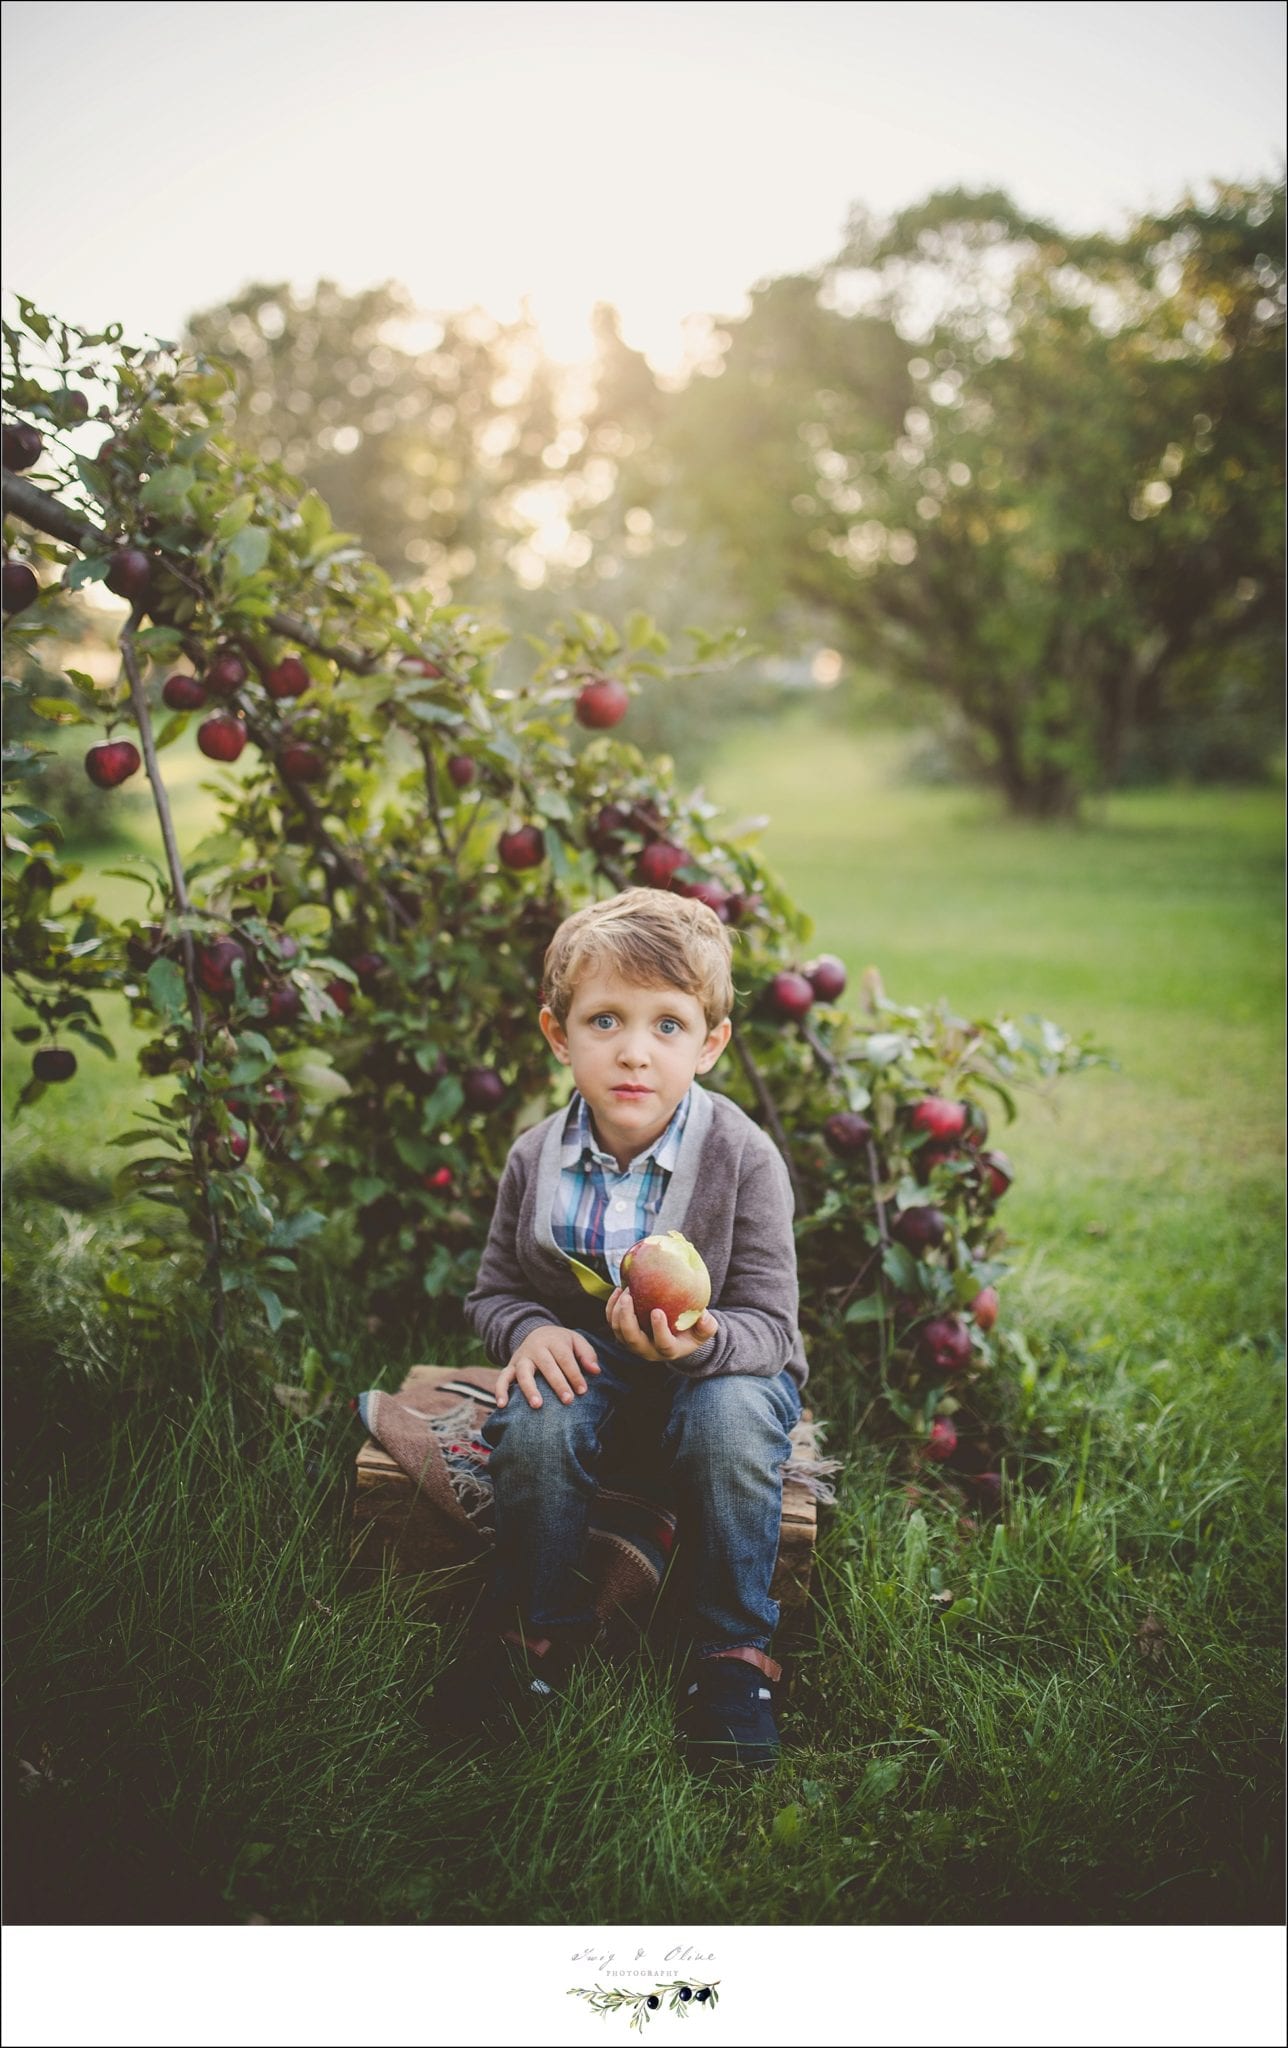 holding apples